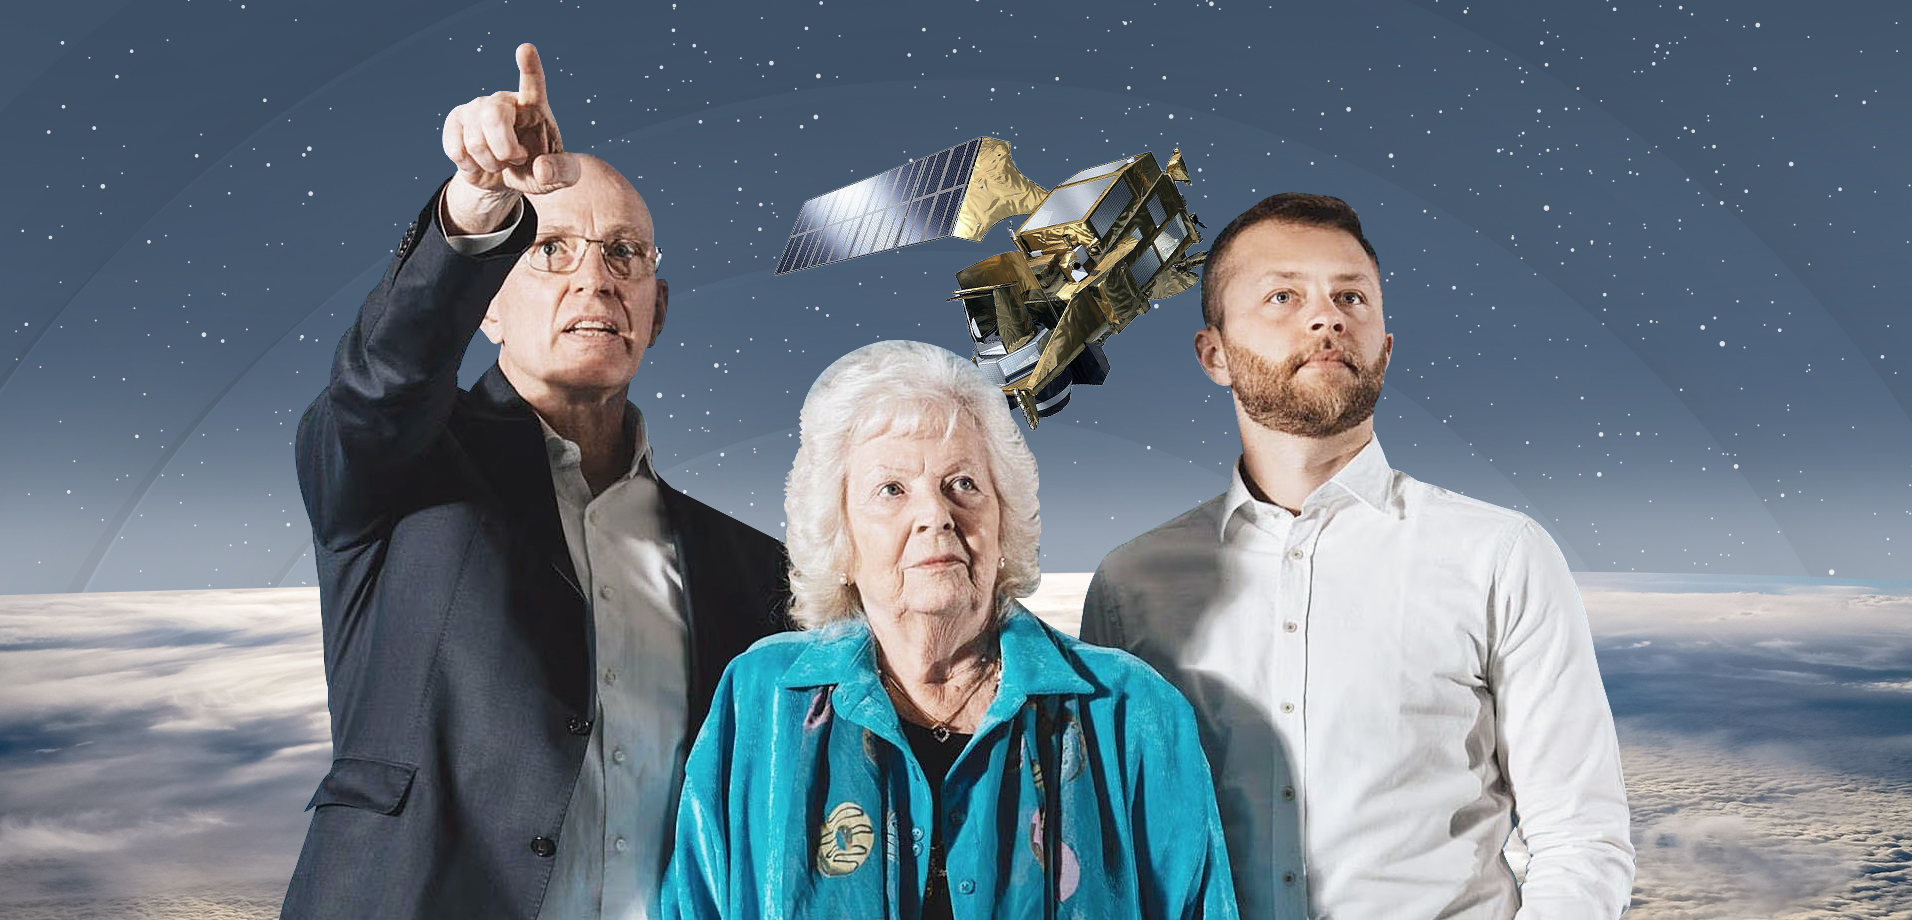 People in Space: The Fuchs family, OHB, Germany